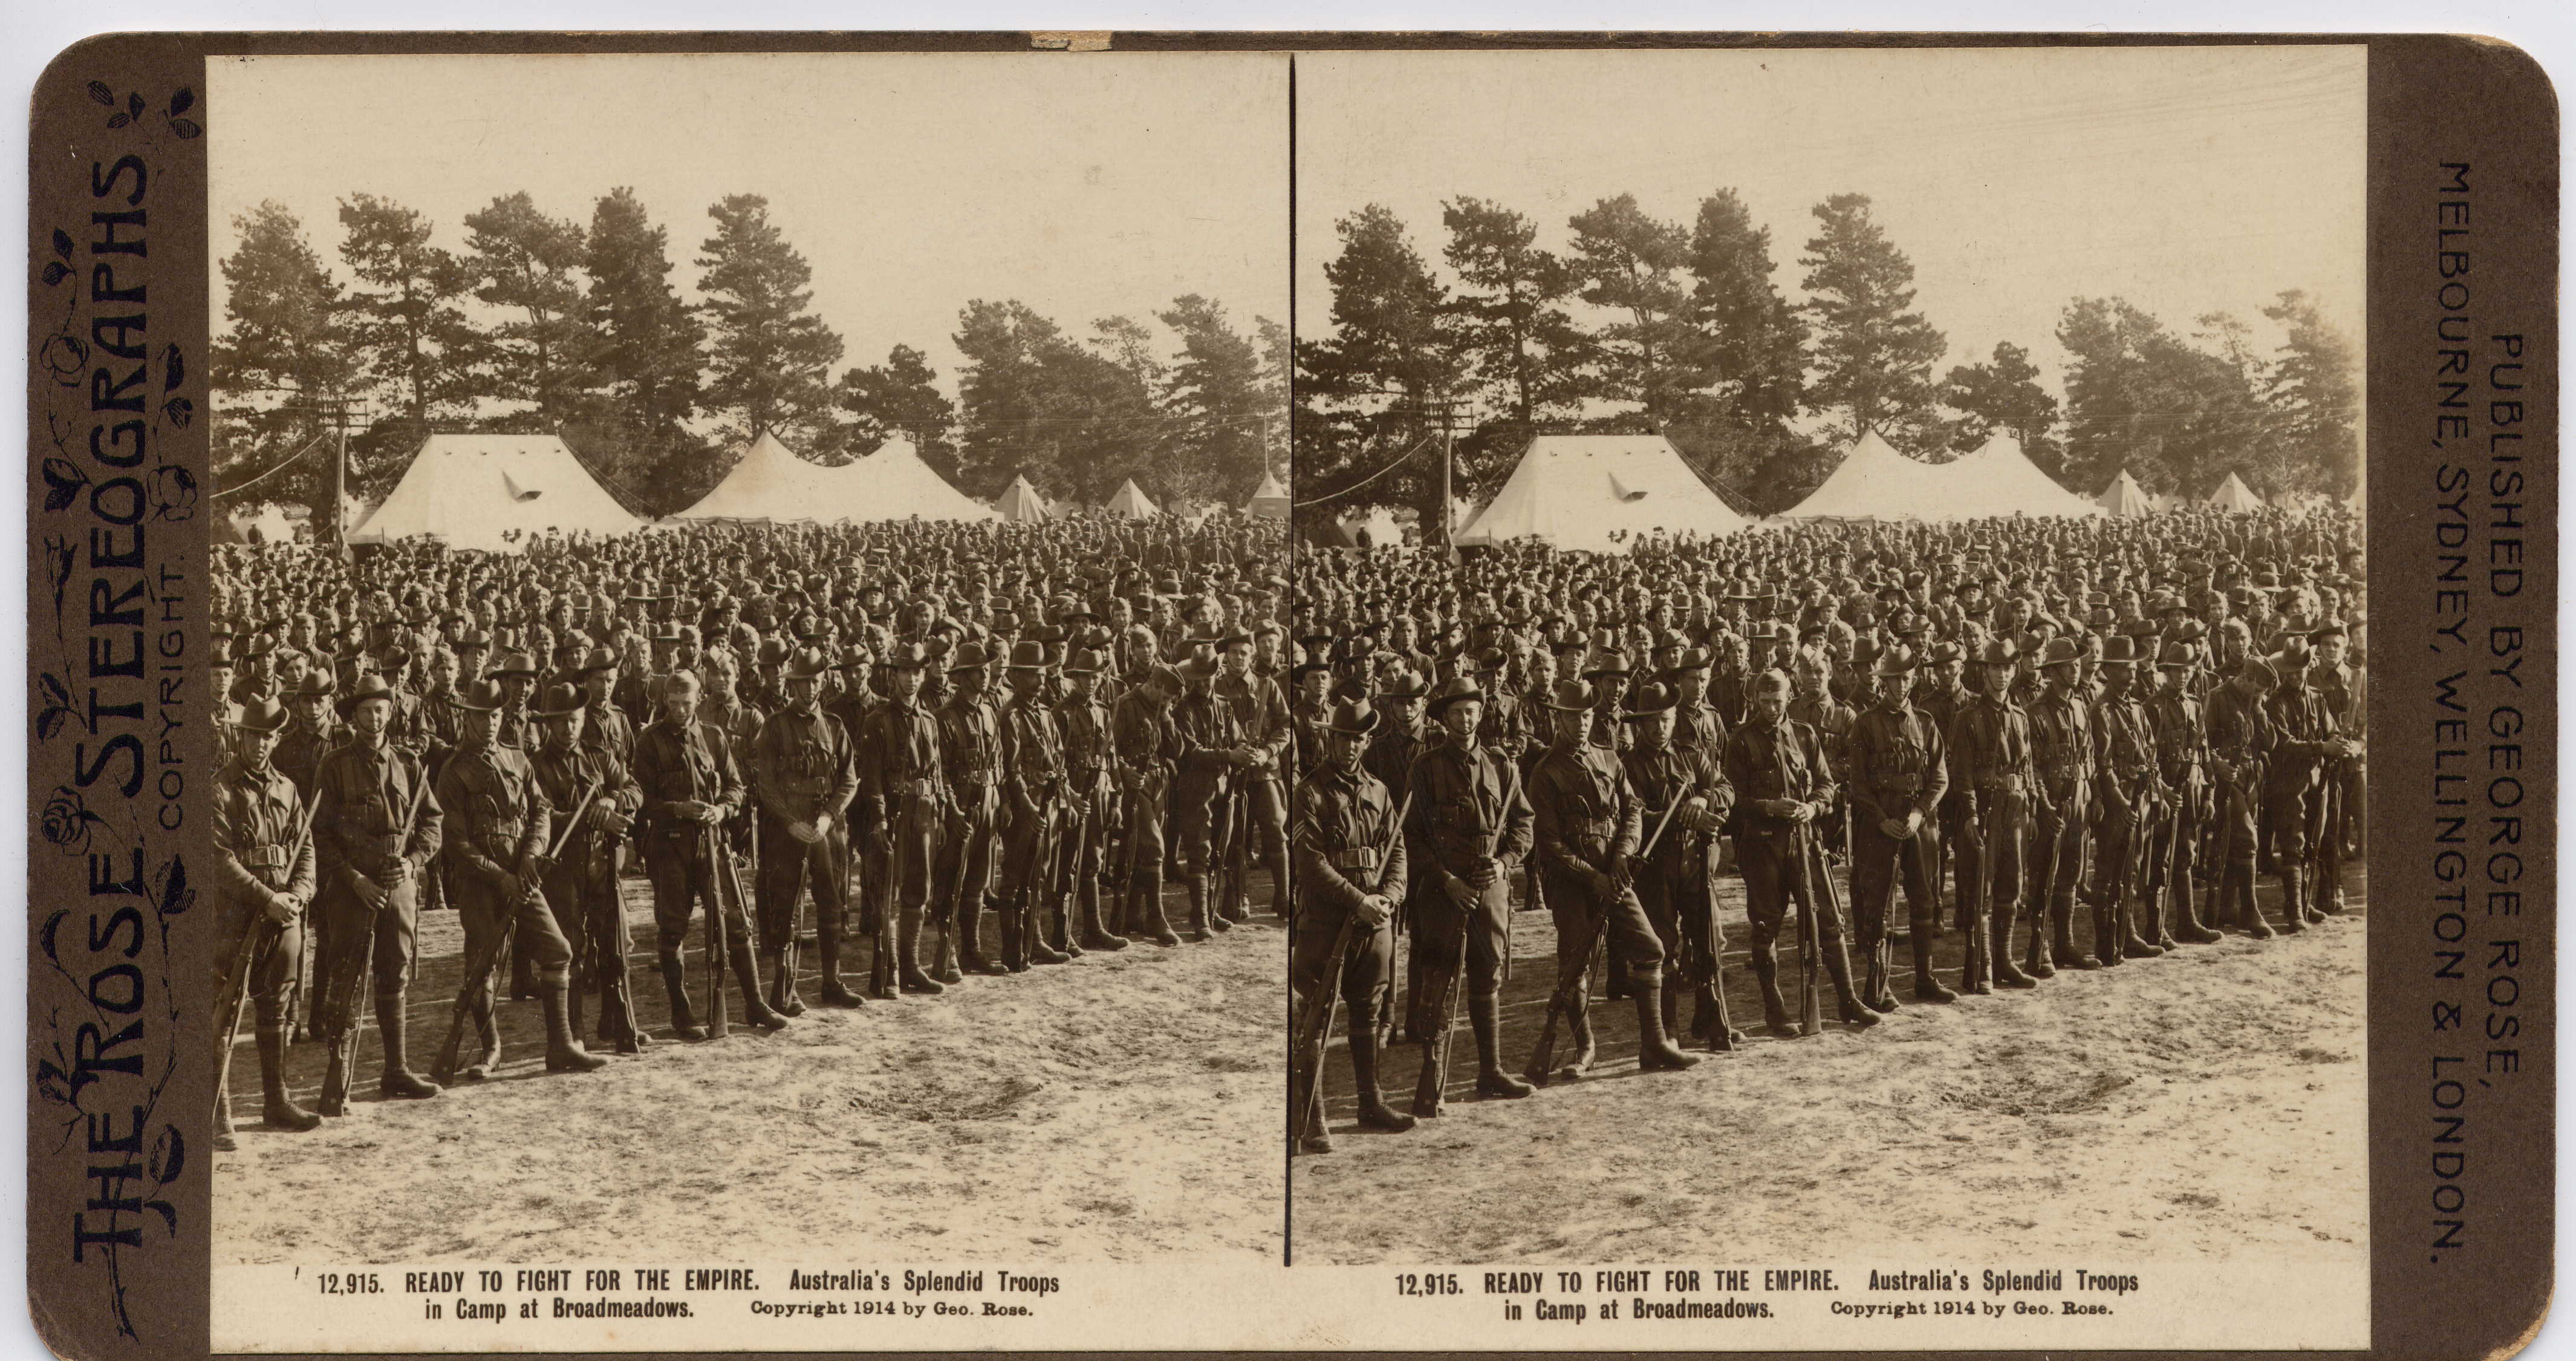 READY TO FIGHT FOR THE EMPIRE. Australia’s Splendid Troops in Camp at Broadmeadows.